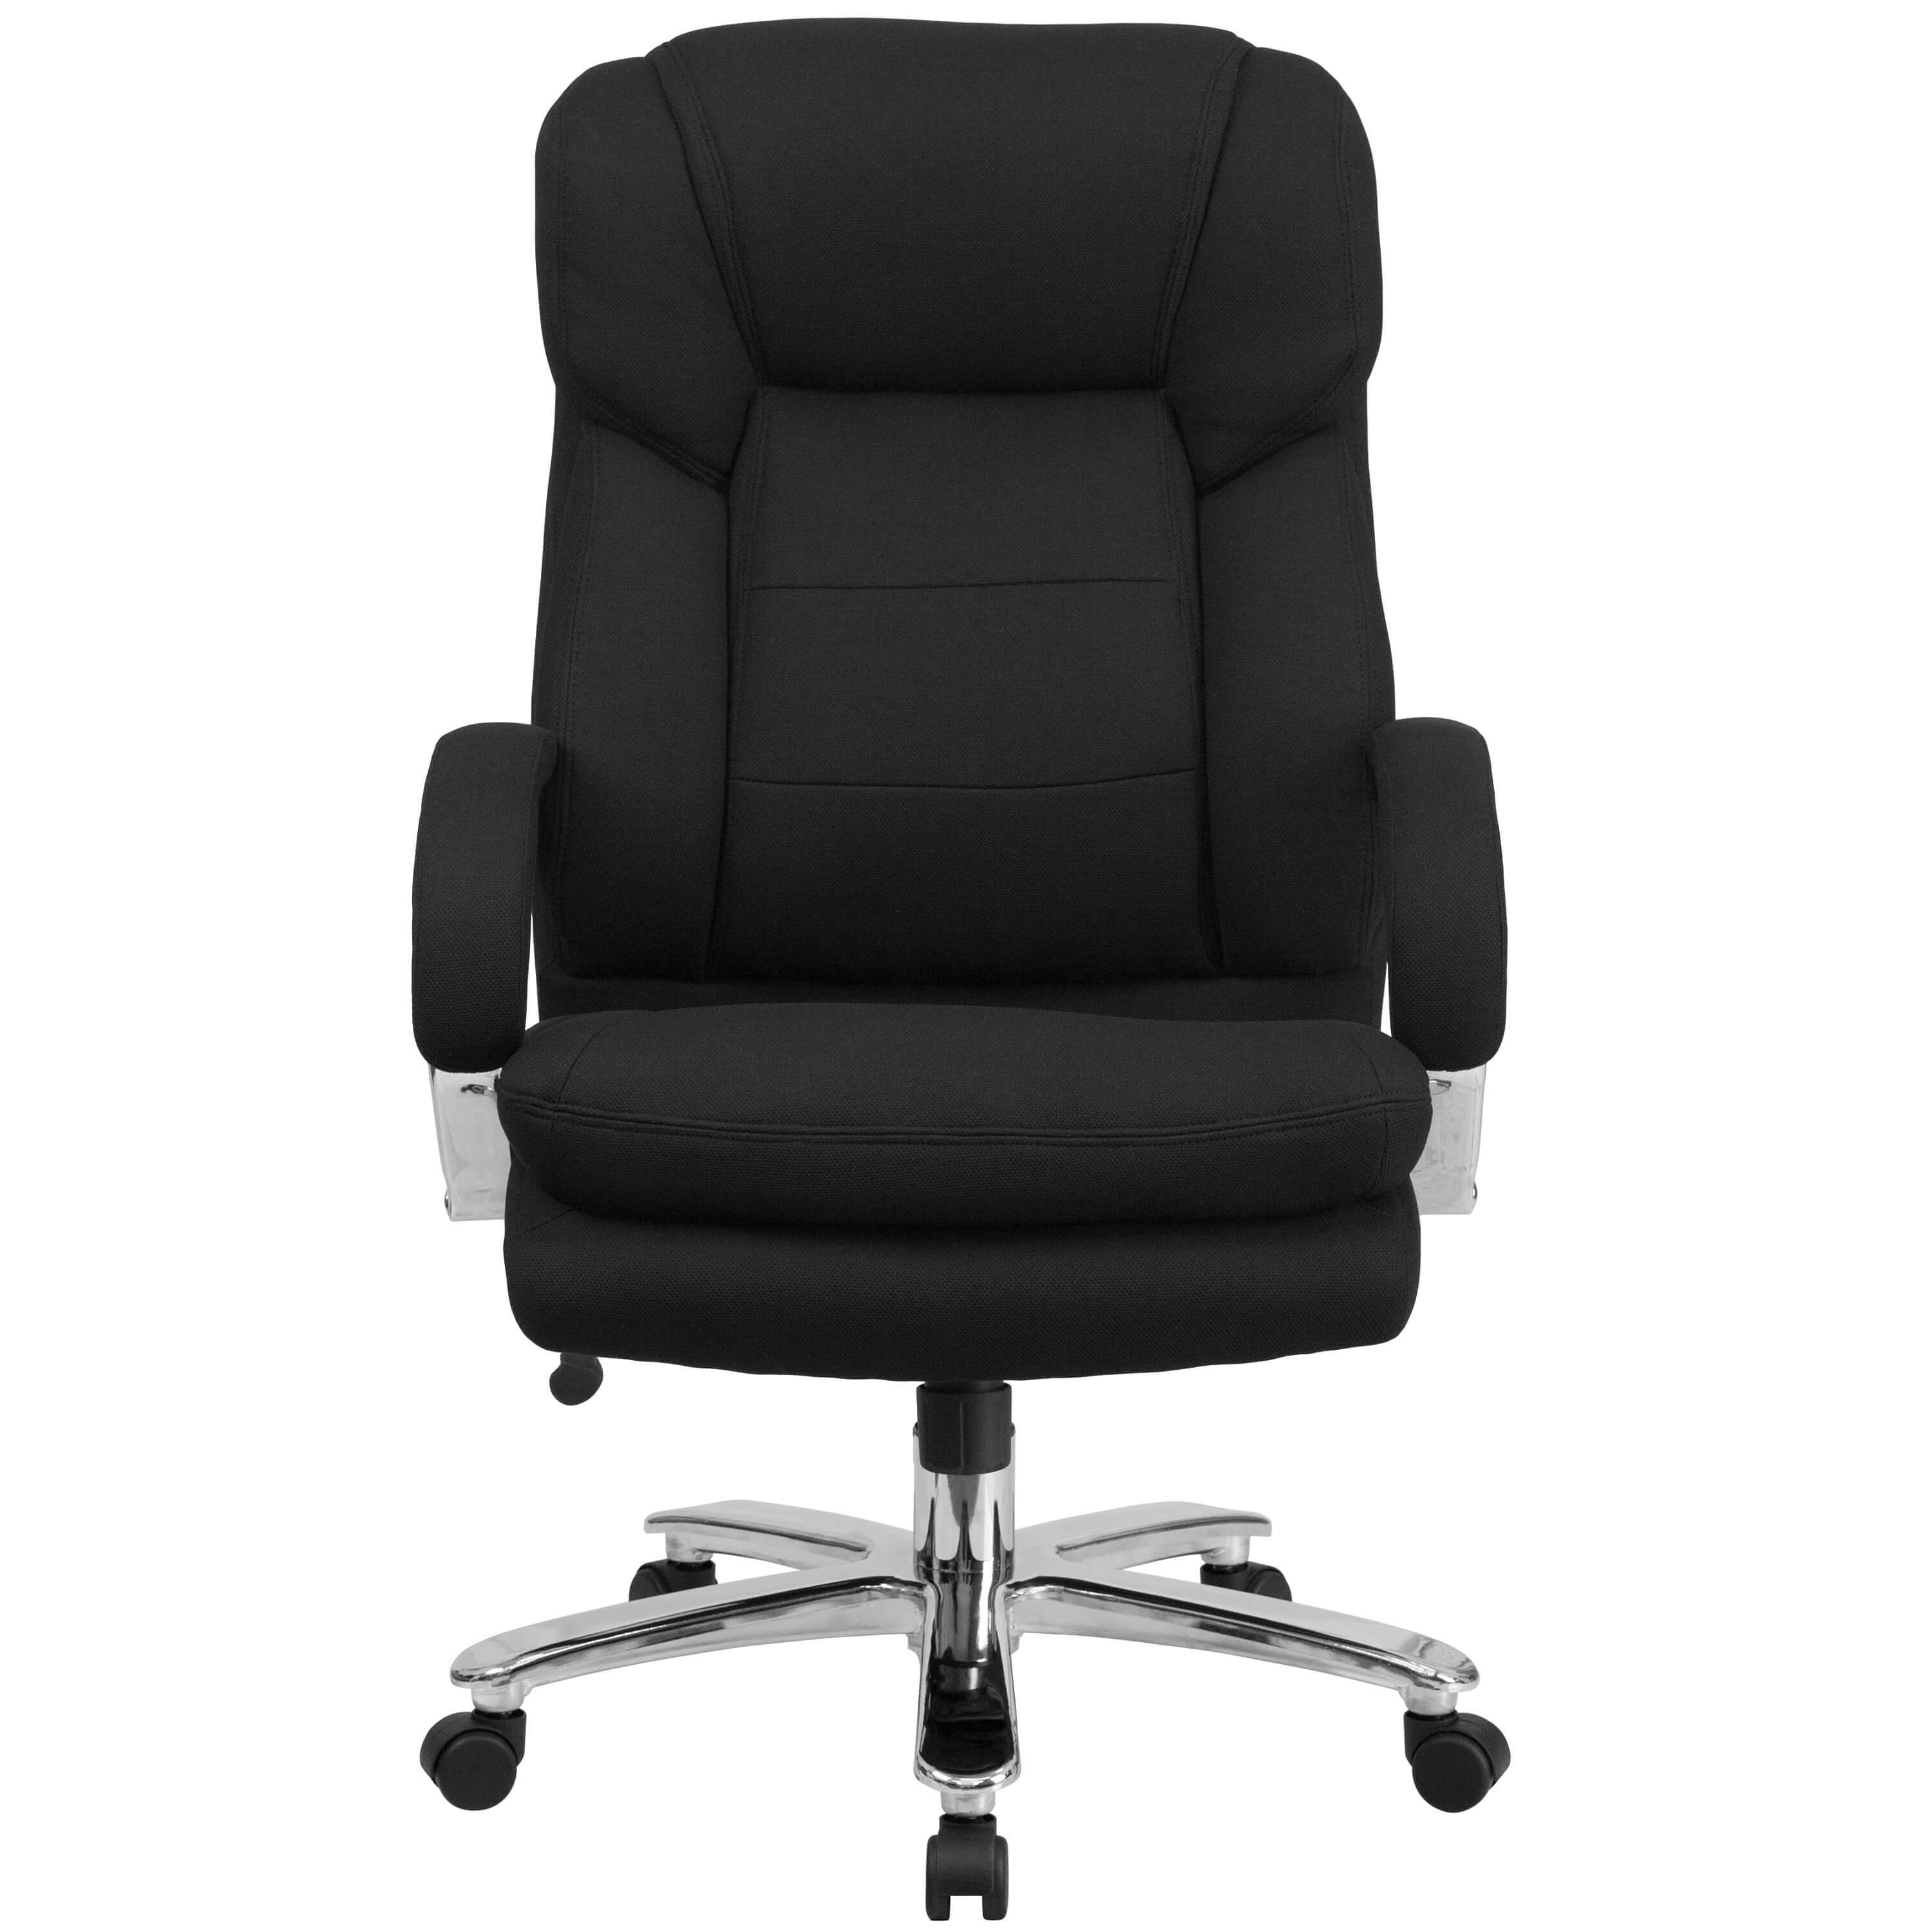 Heavy duty office chairs front view